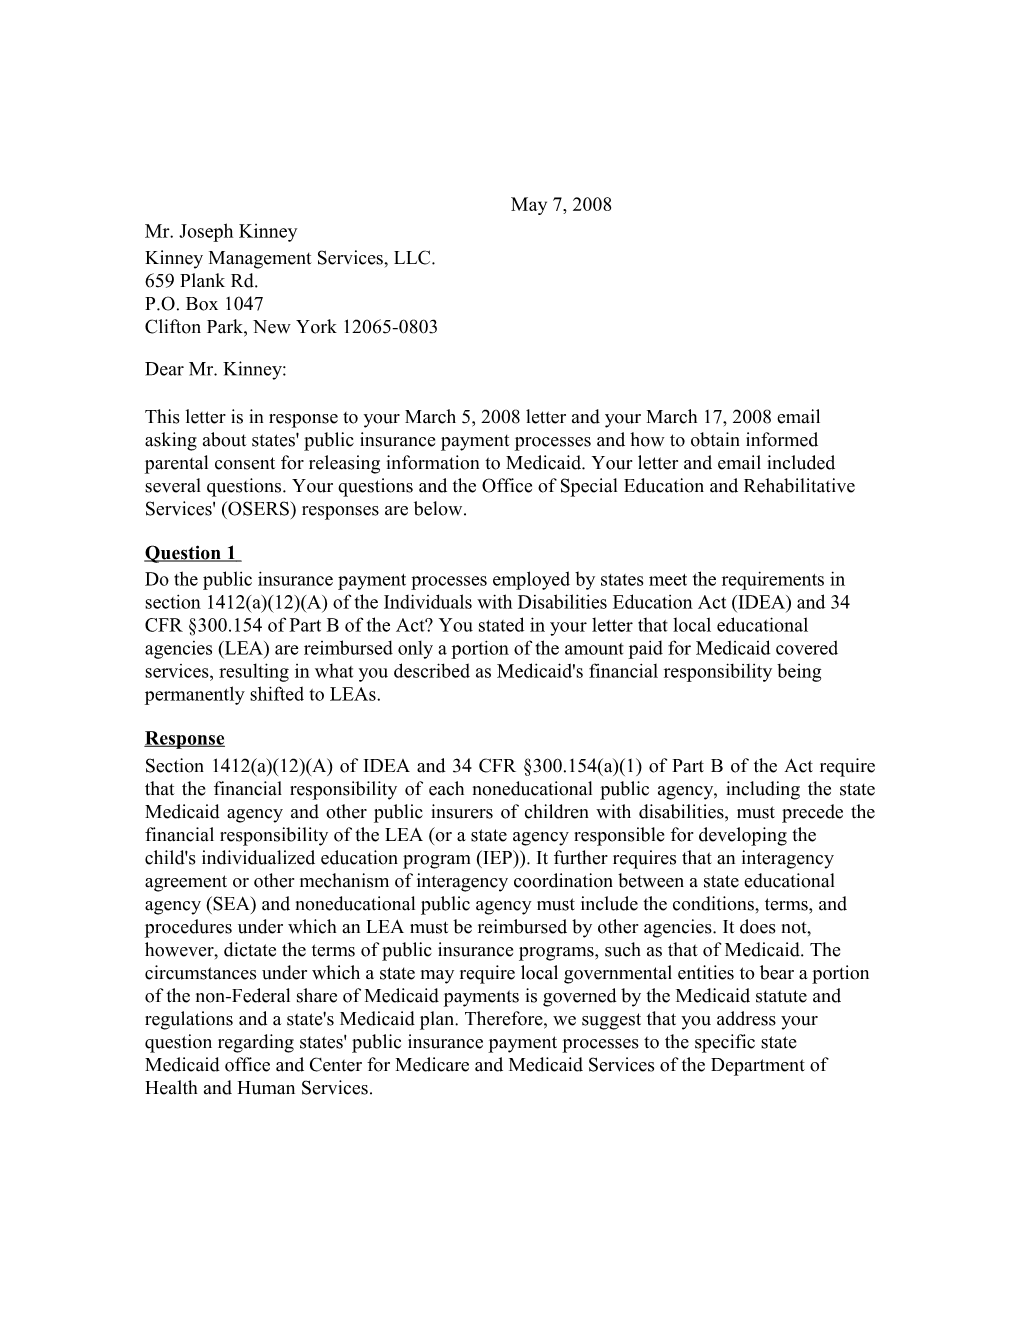 Kinney Letter Dated 05/07/08 Re: Obligations Related to and Methods of Ensuring Services